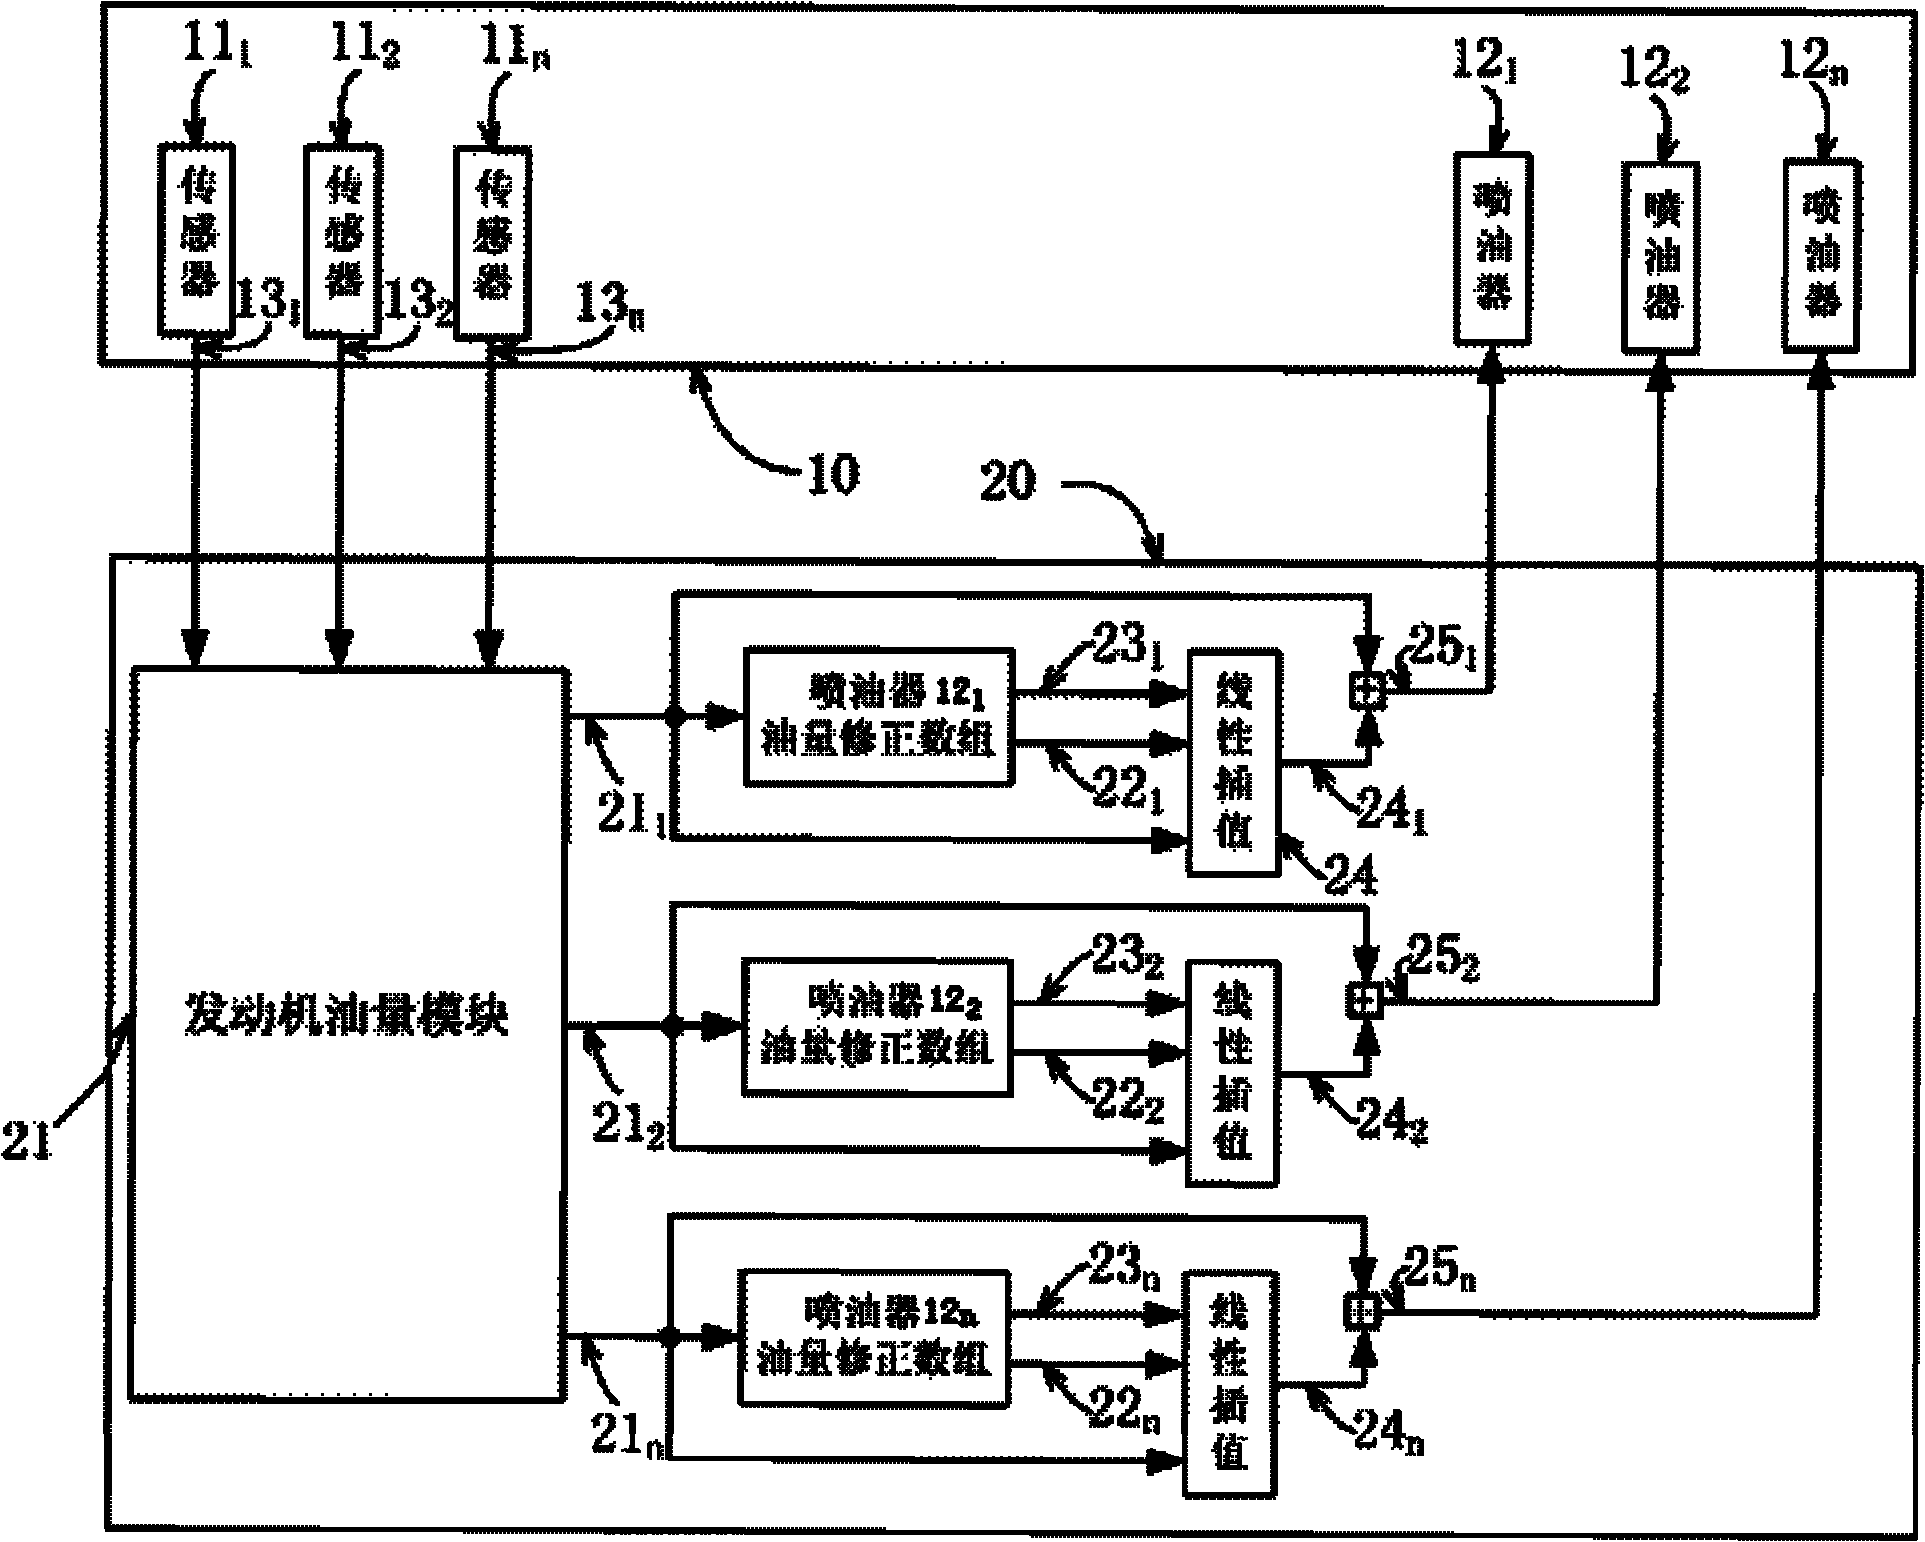 Correcting method for electromagnetic valve of common-rail diesel injector